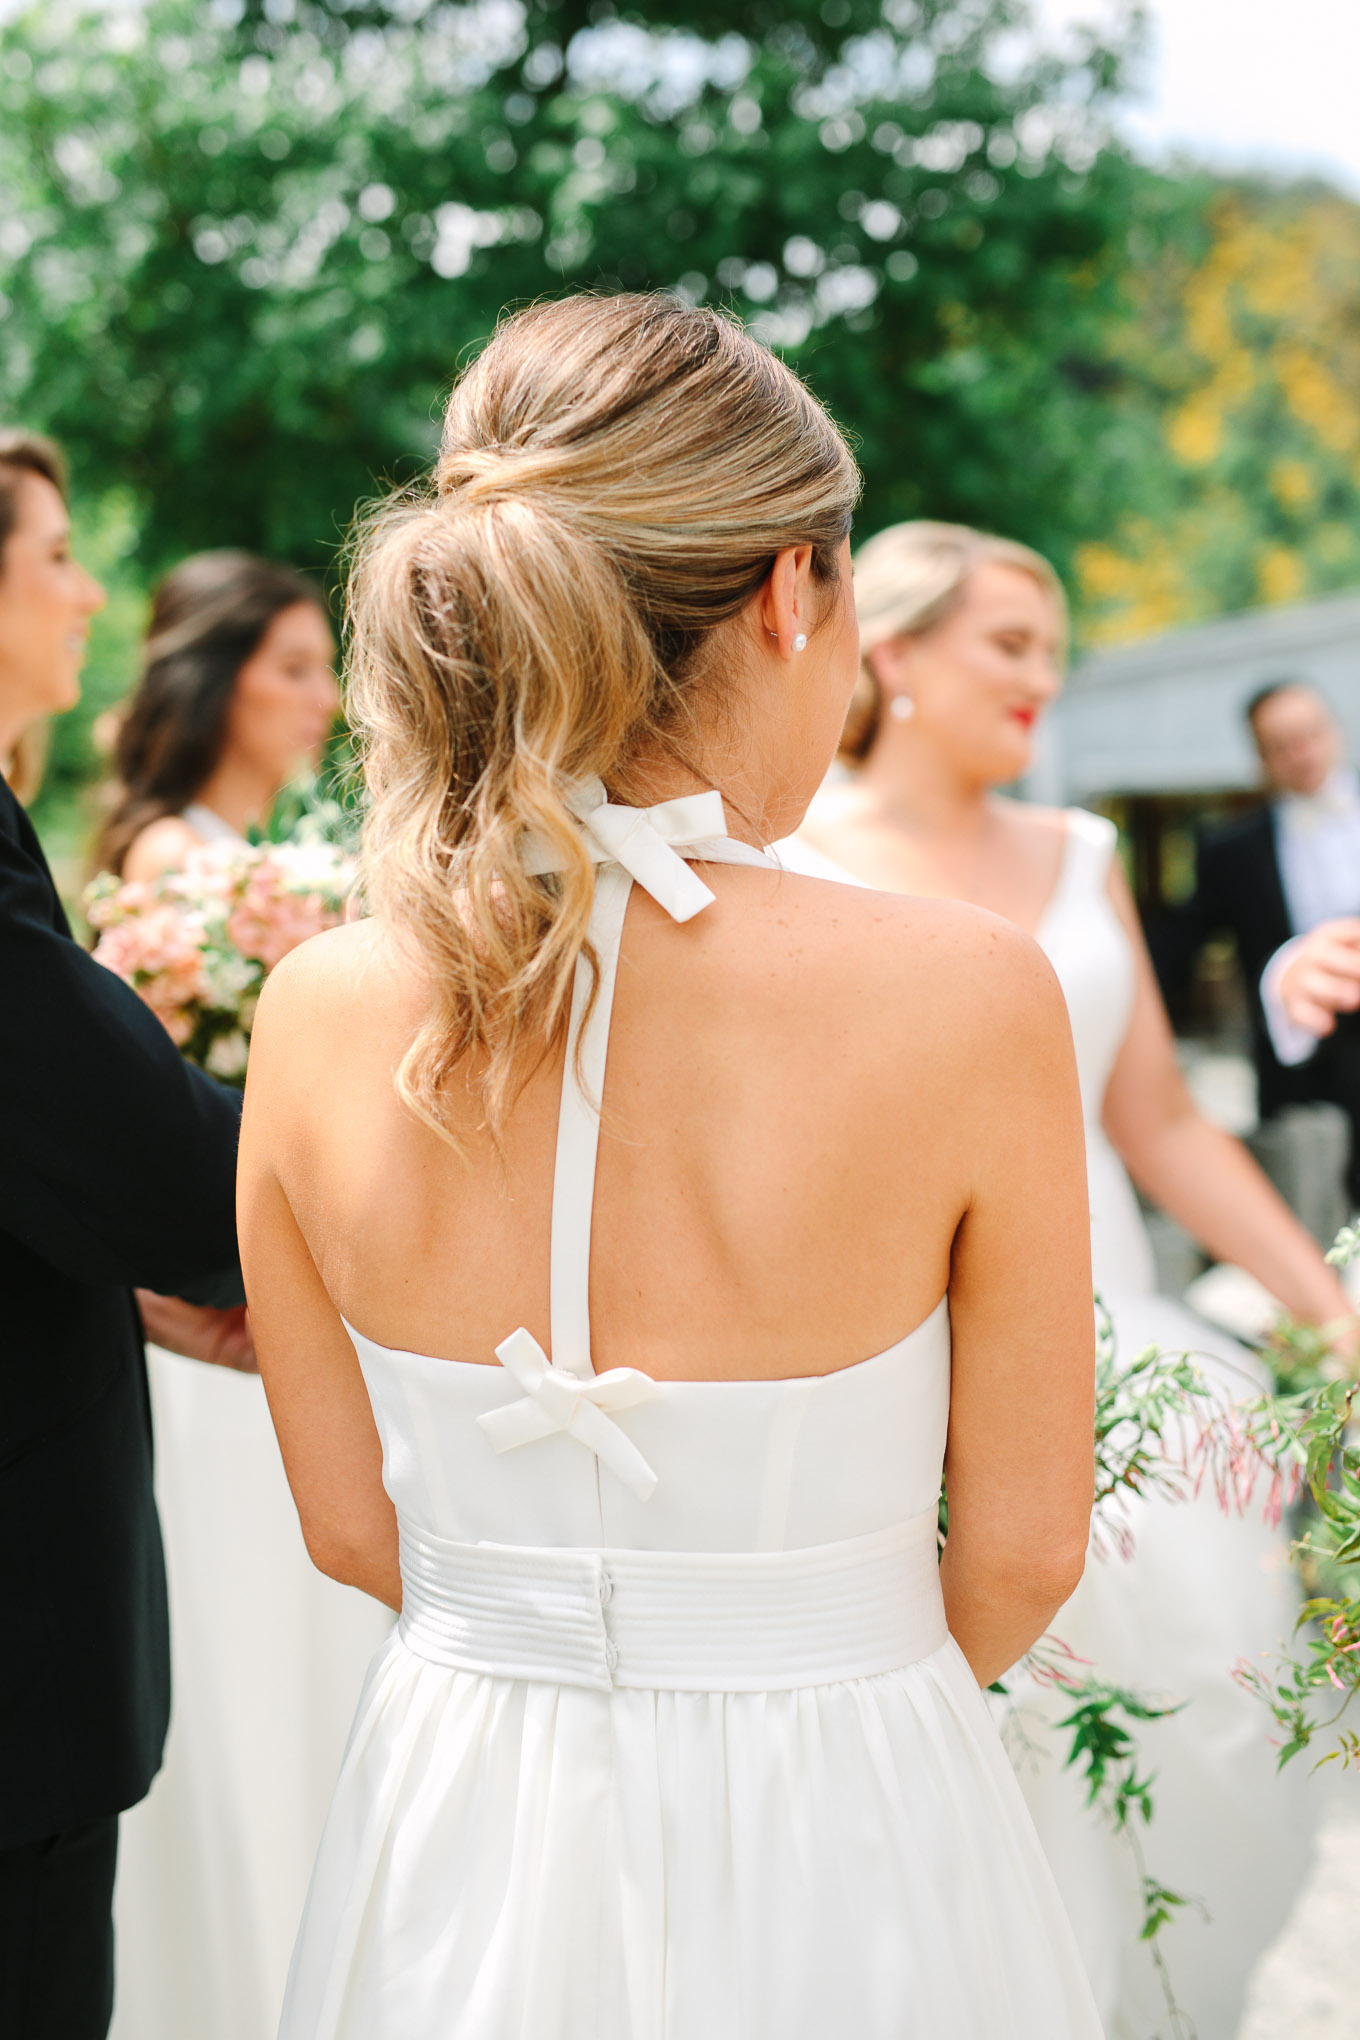 Bow back detail on bridesmaids' dress. Millbrook Resort Queenstown New Zealand wedding by Mary Costa Photography | www.marycostaweddings.com